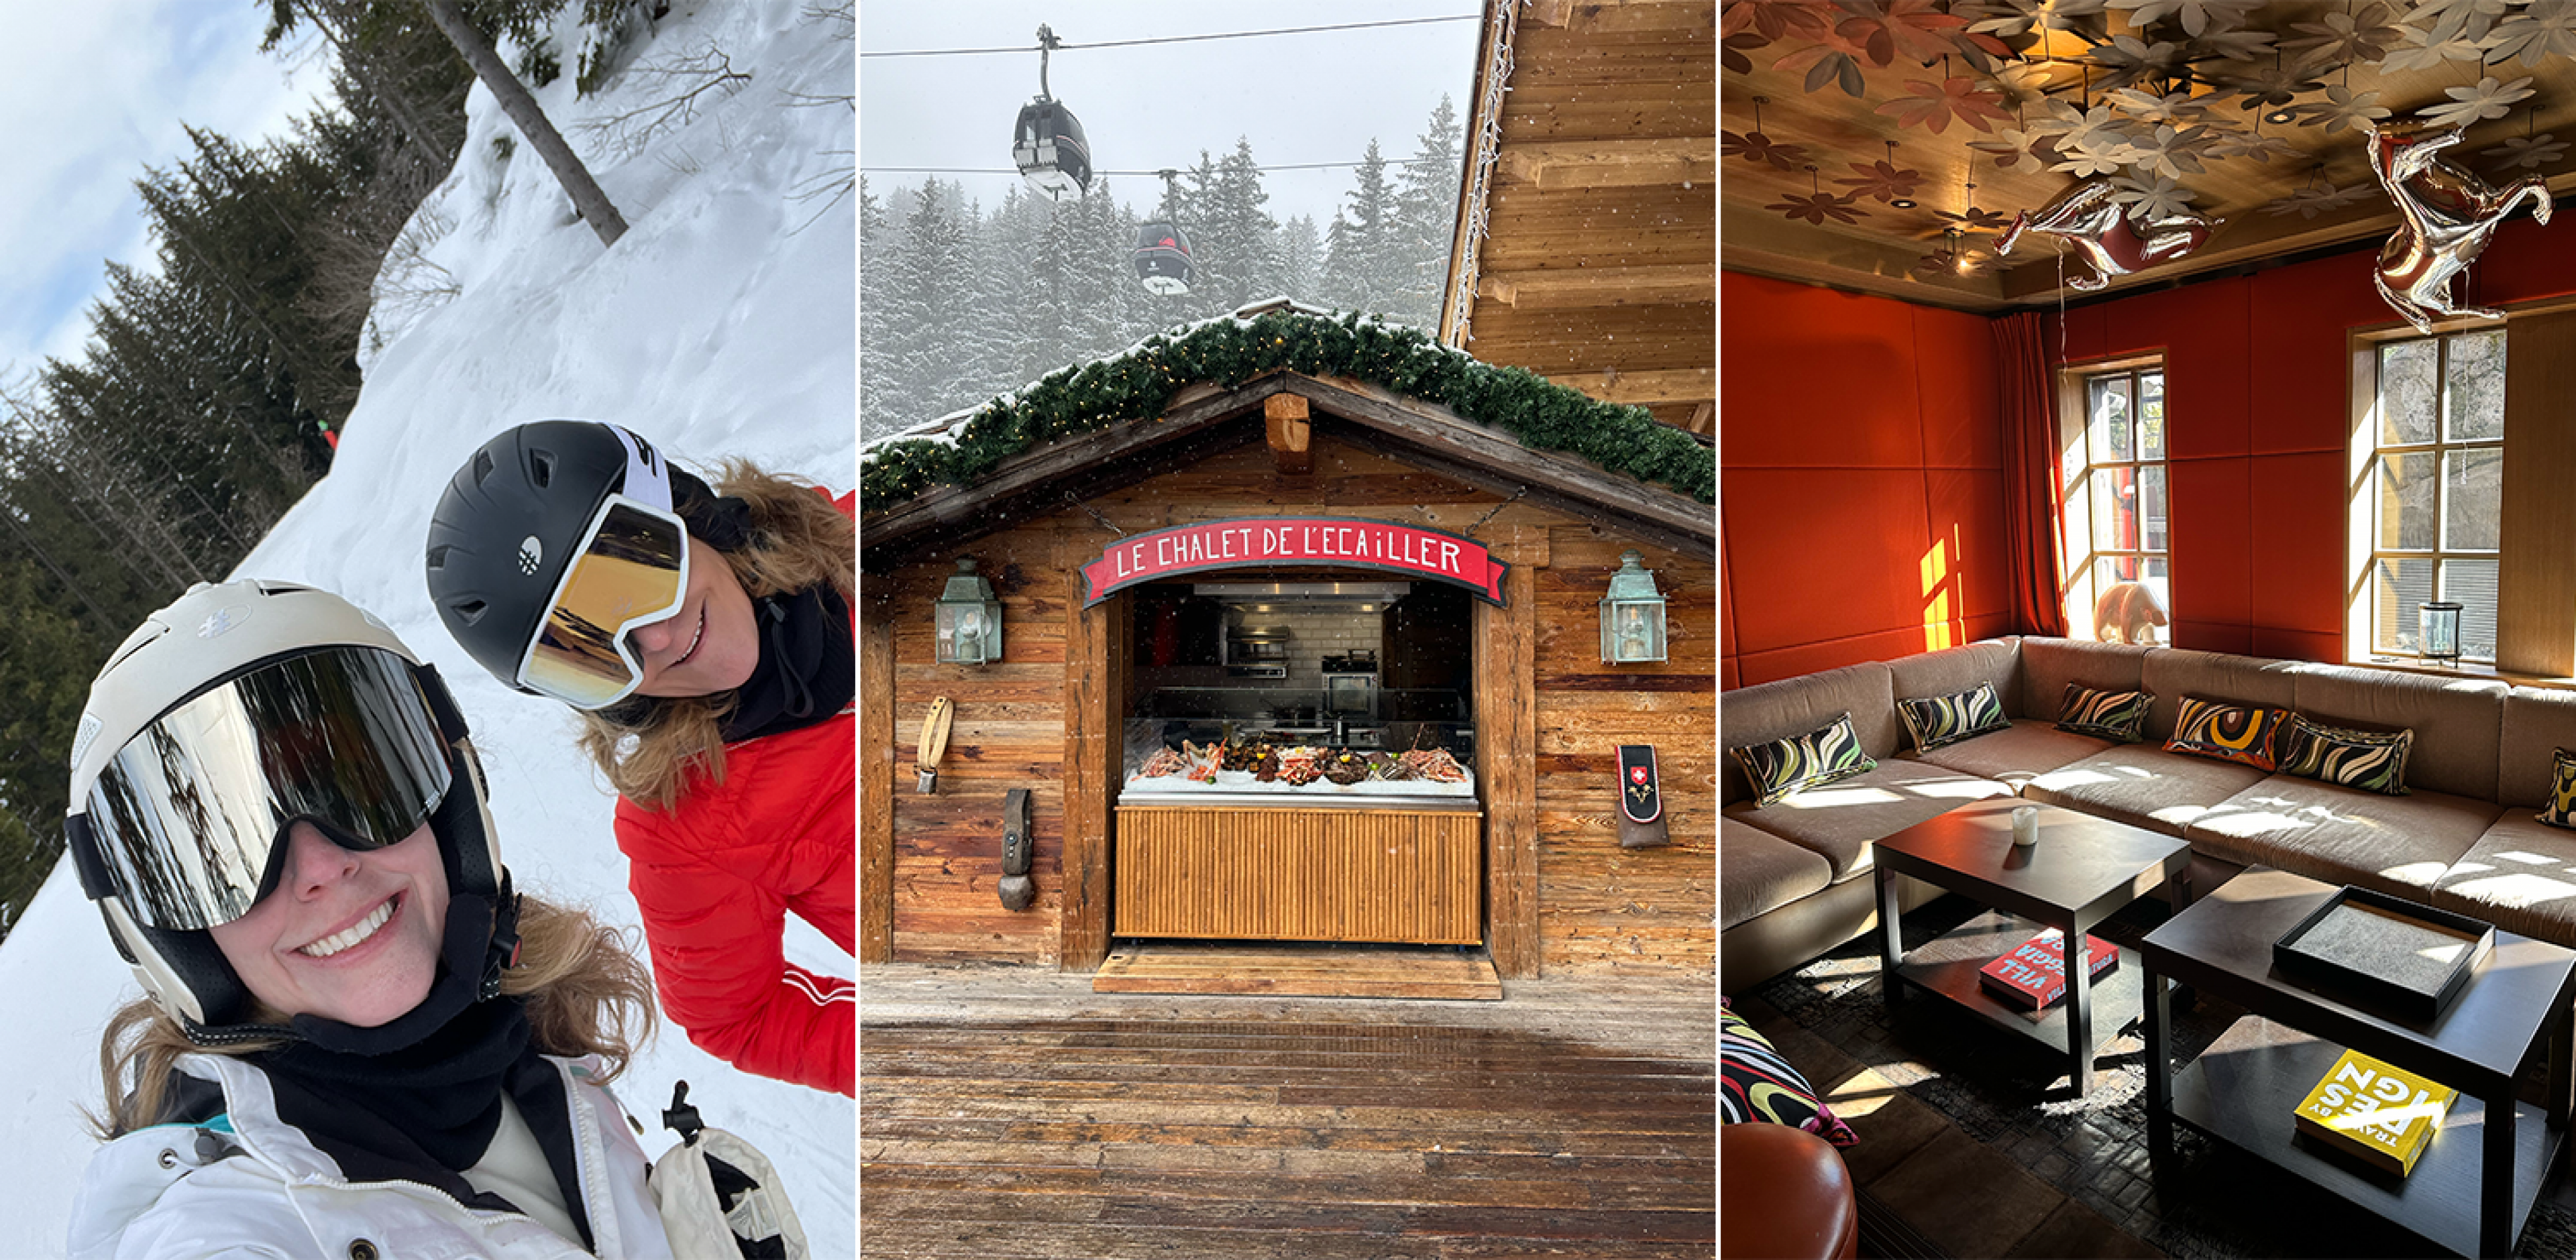 Skiing, alpine cuisine and hotel in Courchevel